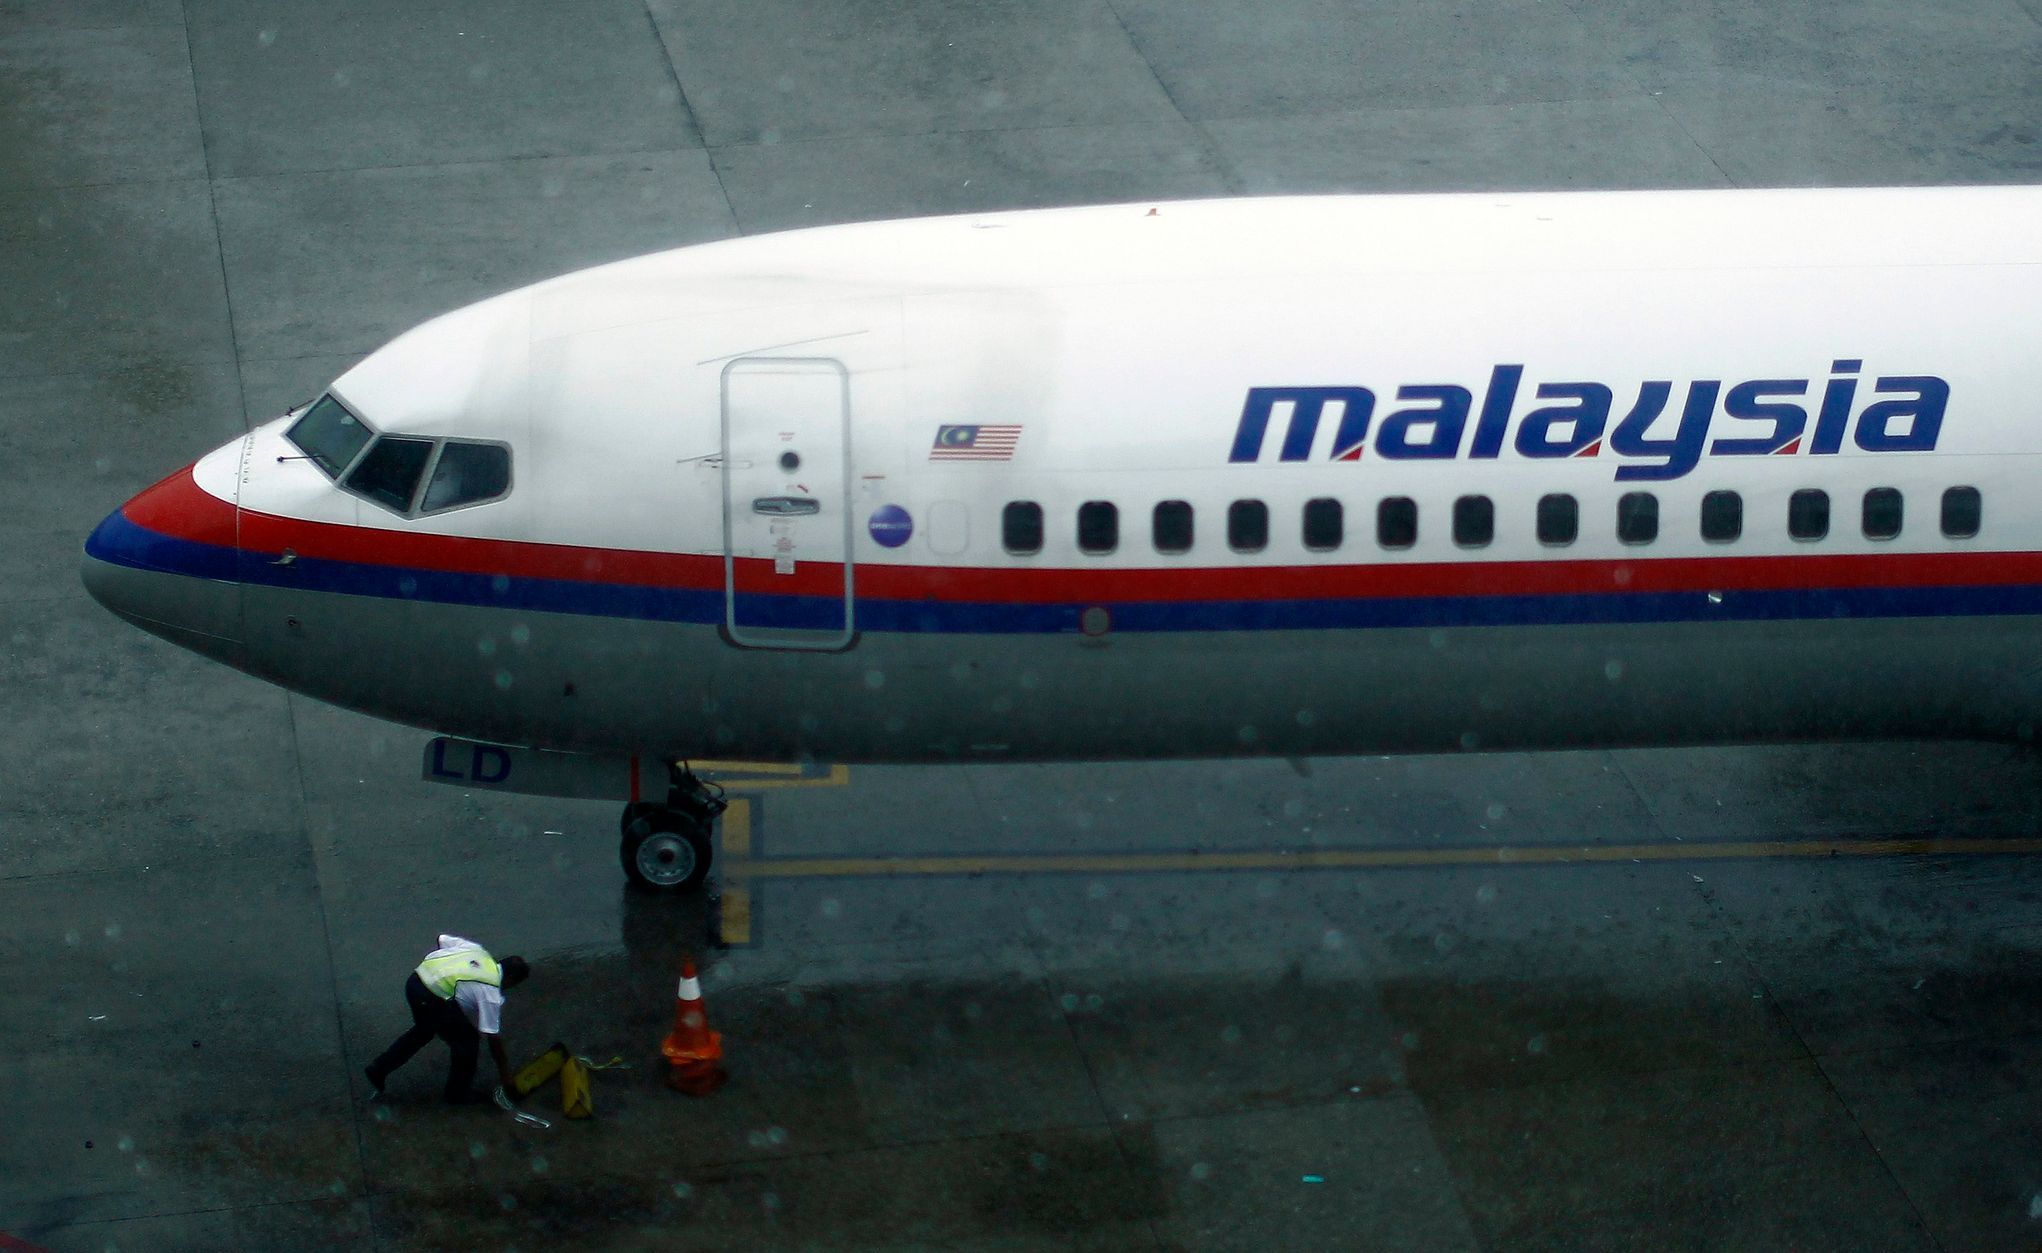 A ground staff works near a Malaysia Airlines aircraft at the Kuala Lumpur International Airport in Sepang